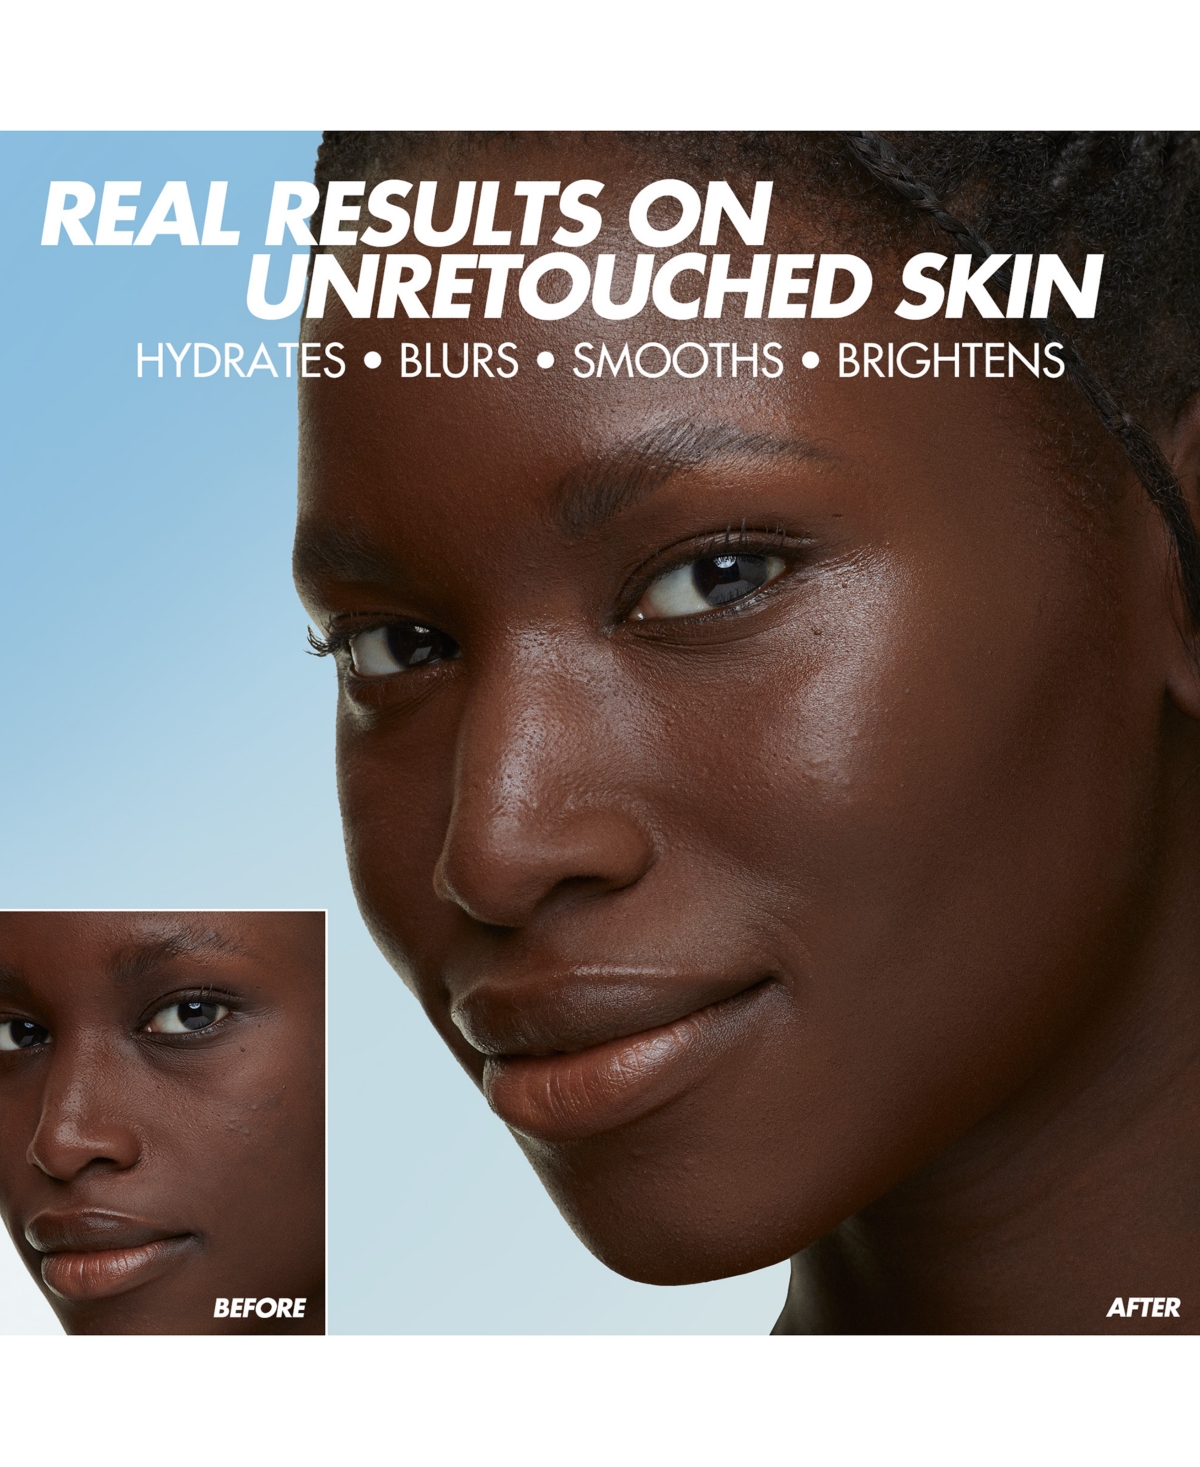 Shop Make Up For Ever Hd Skin Hydra Glow Skincare Foundation With Hyaluronic Acid In Y - Warm Pralineâ - For Medium To Tan S